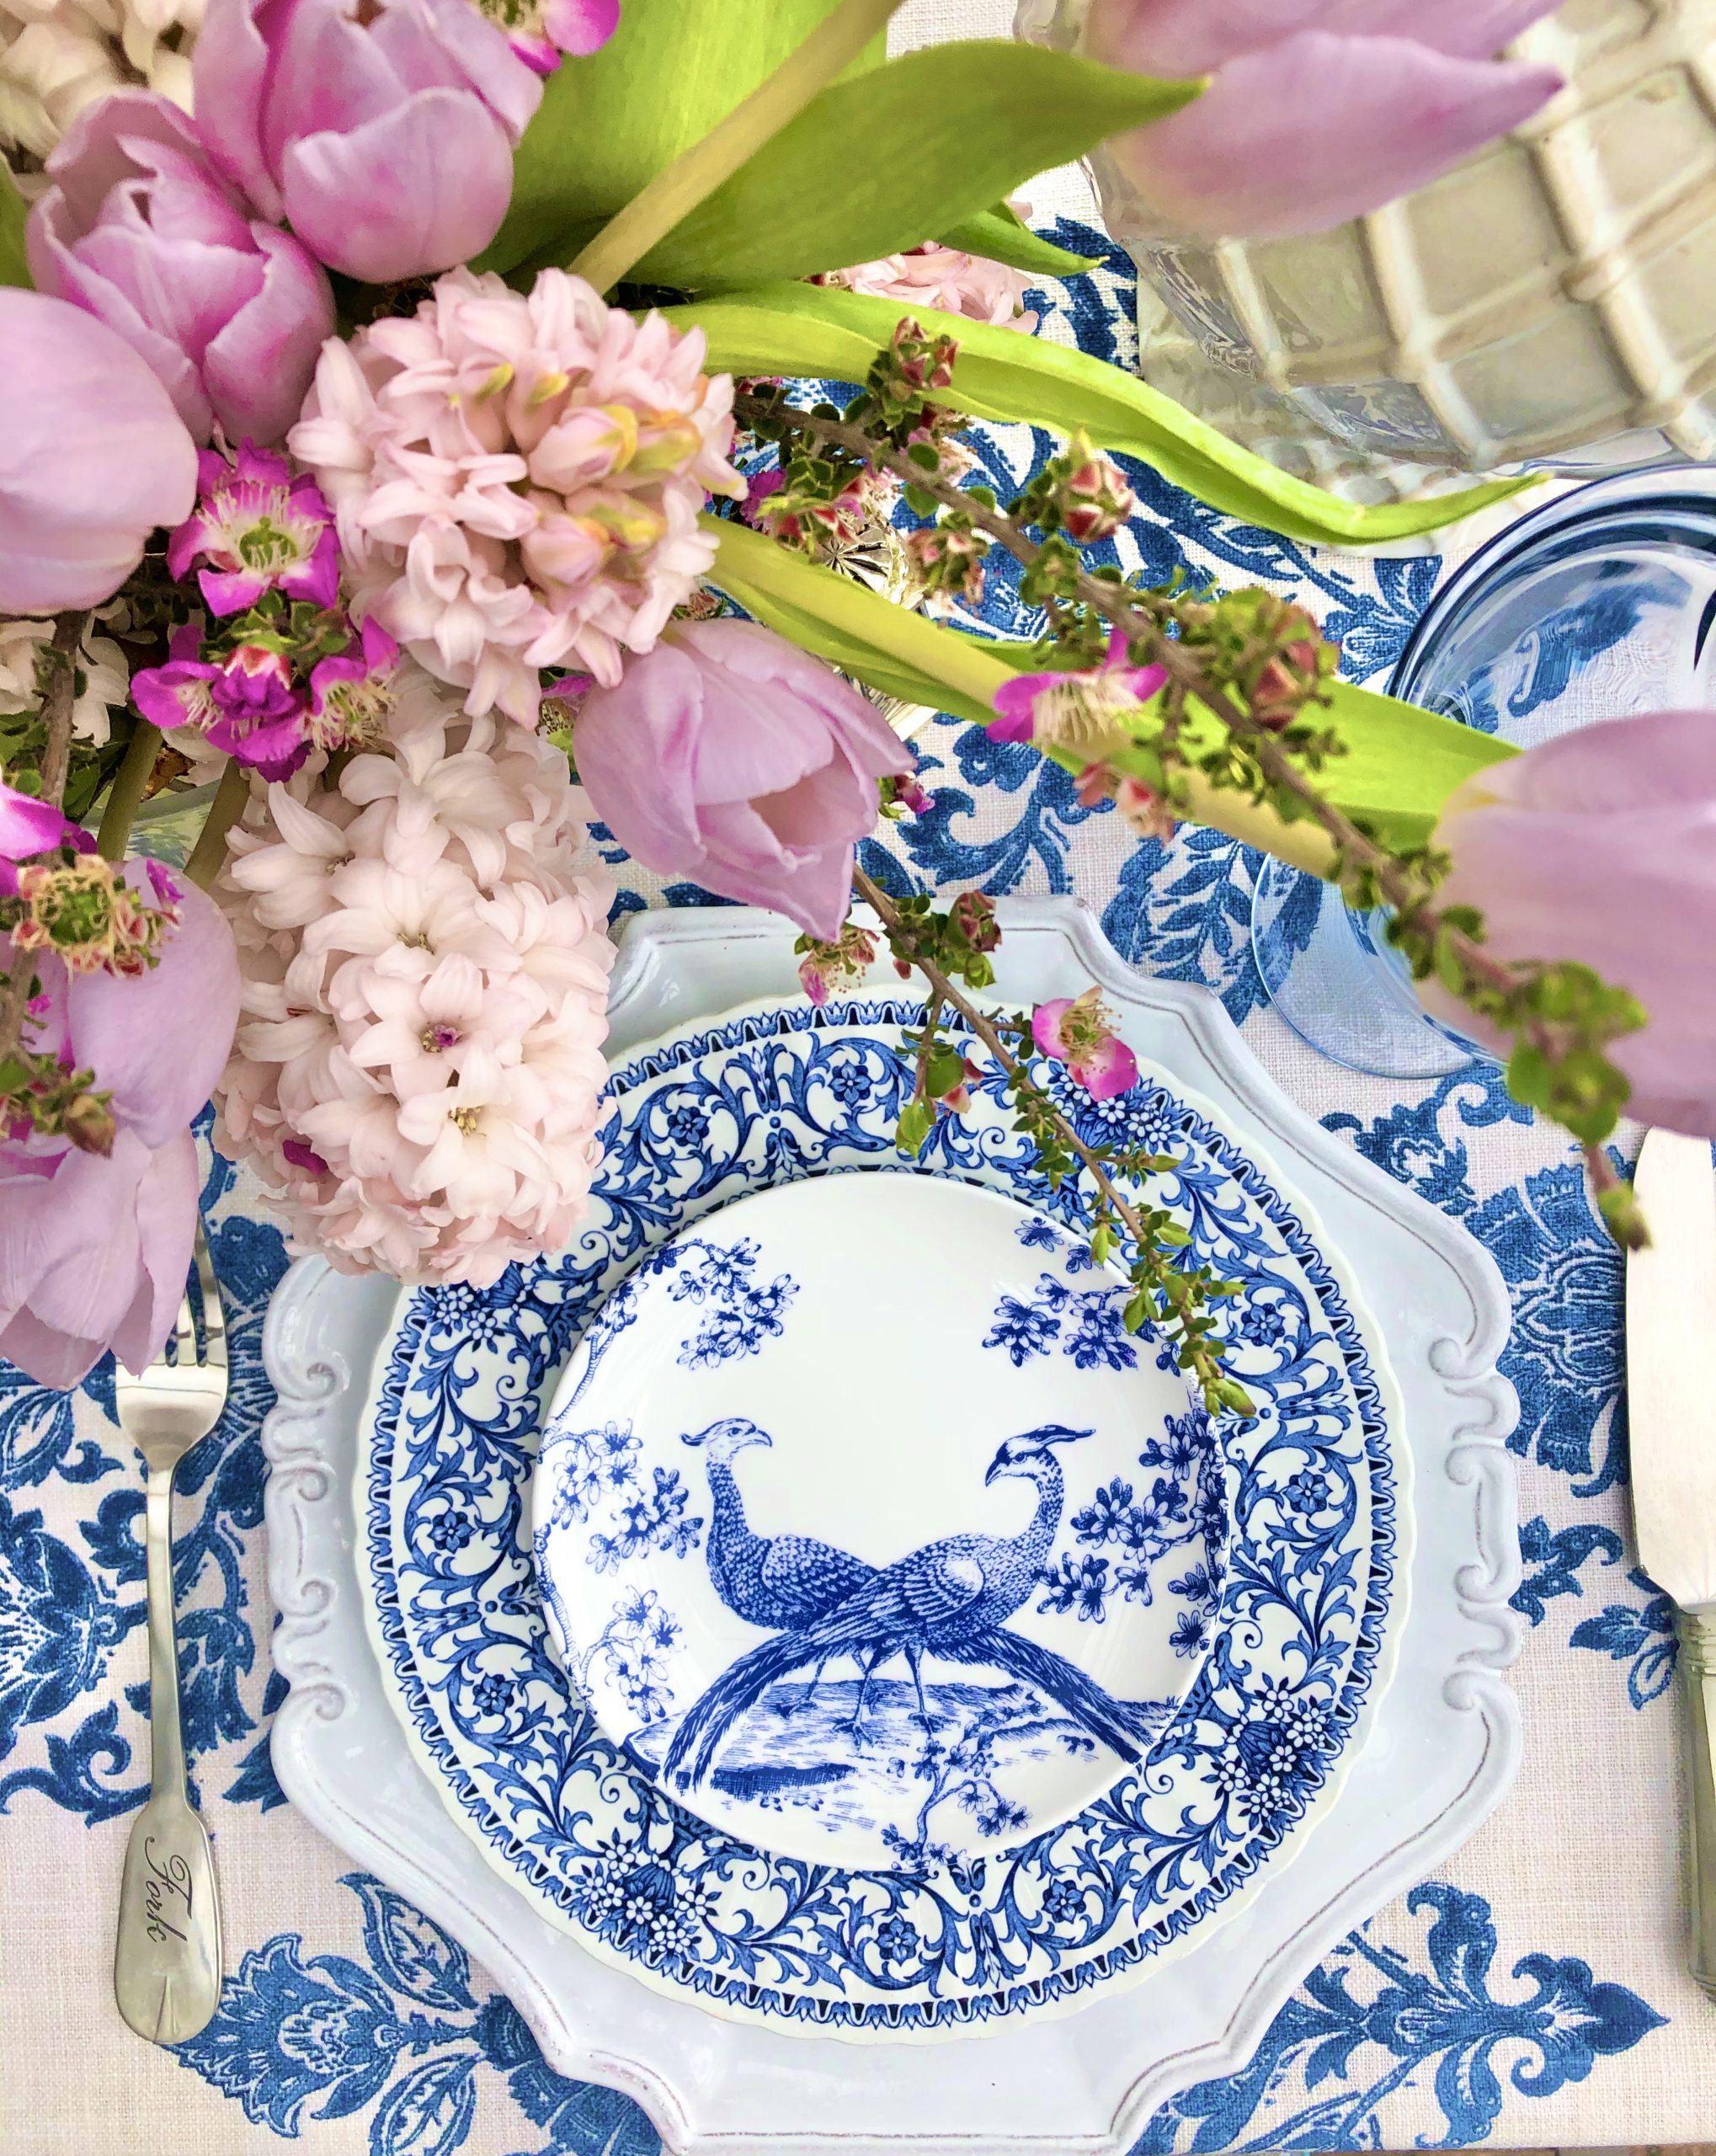 blue and white tablesetting